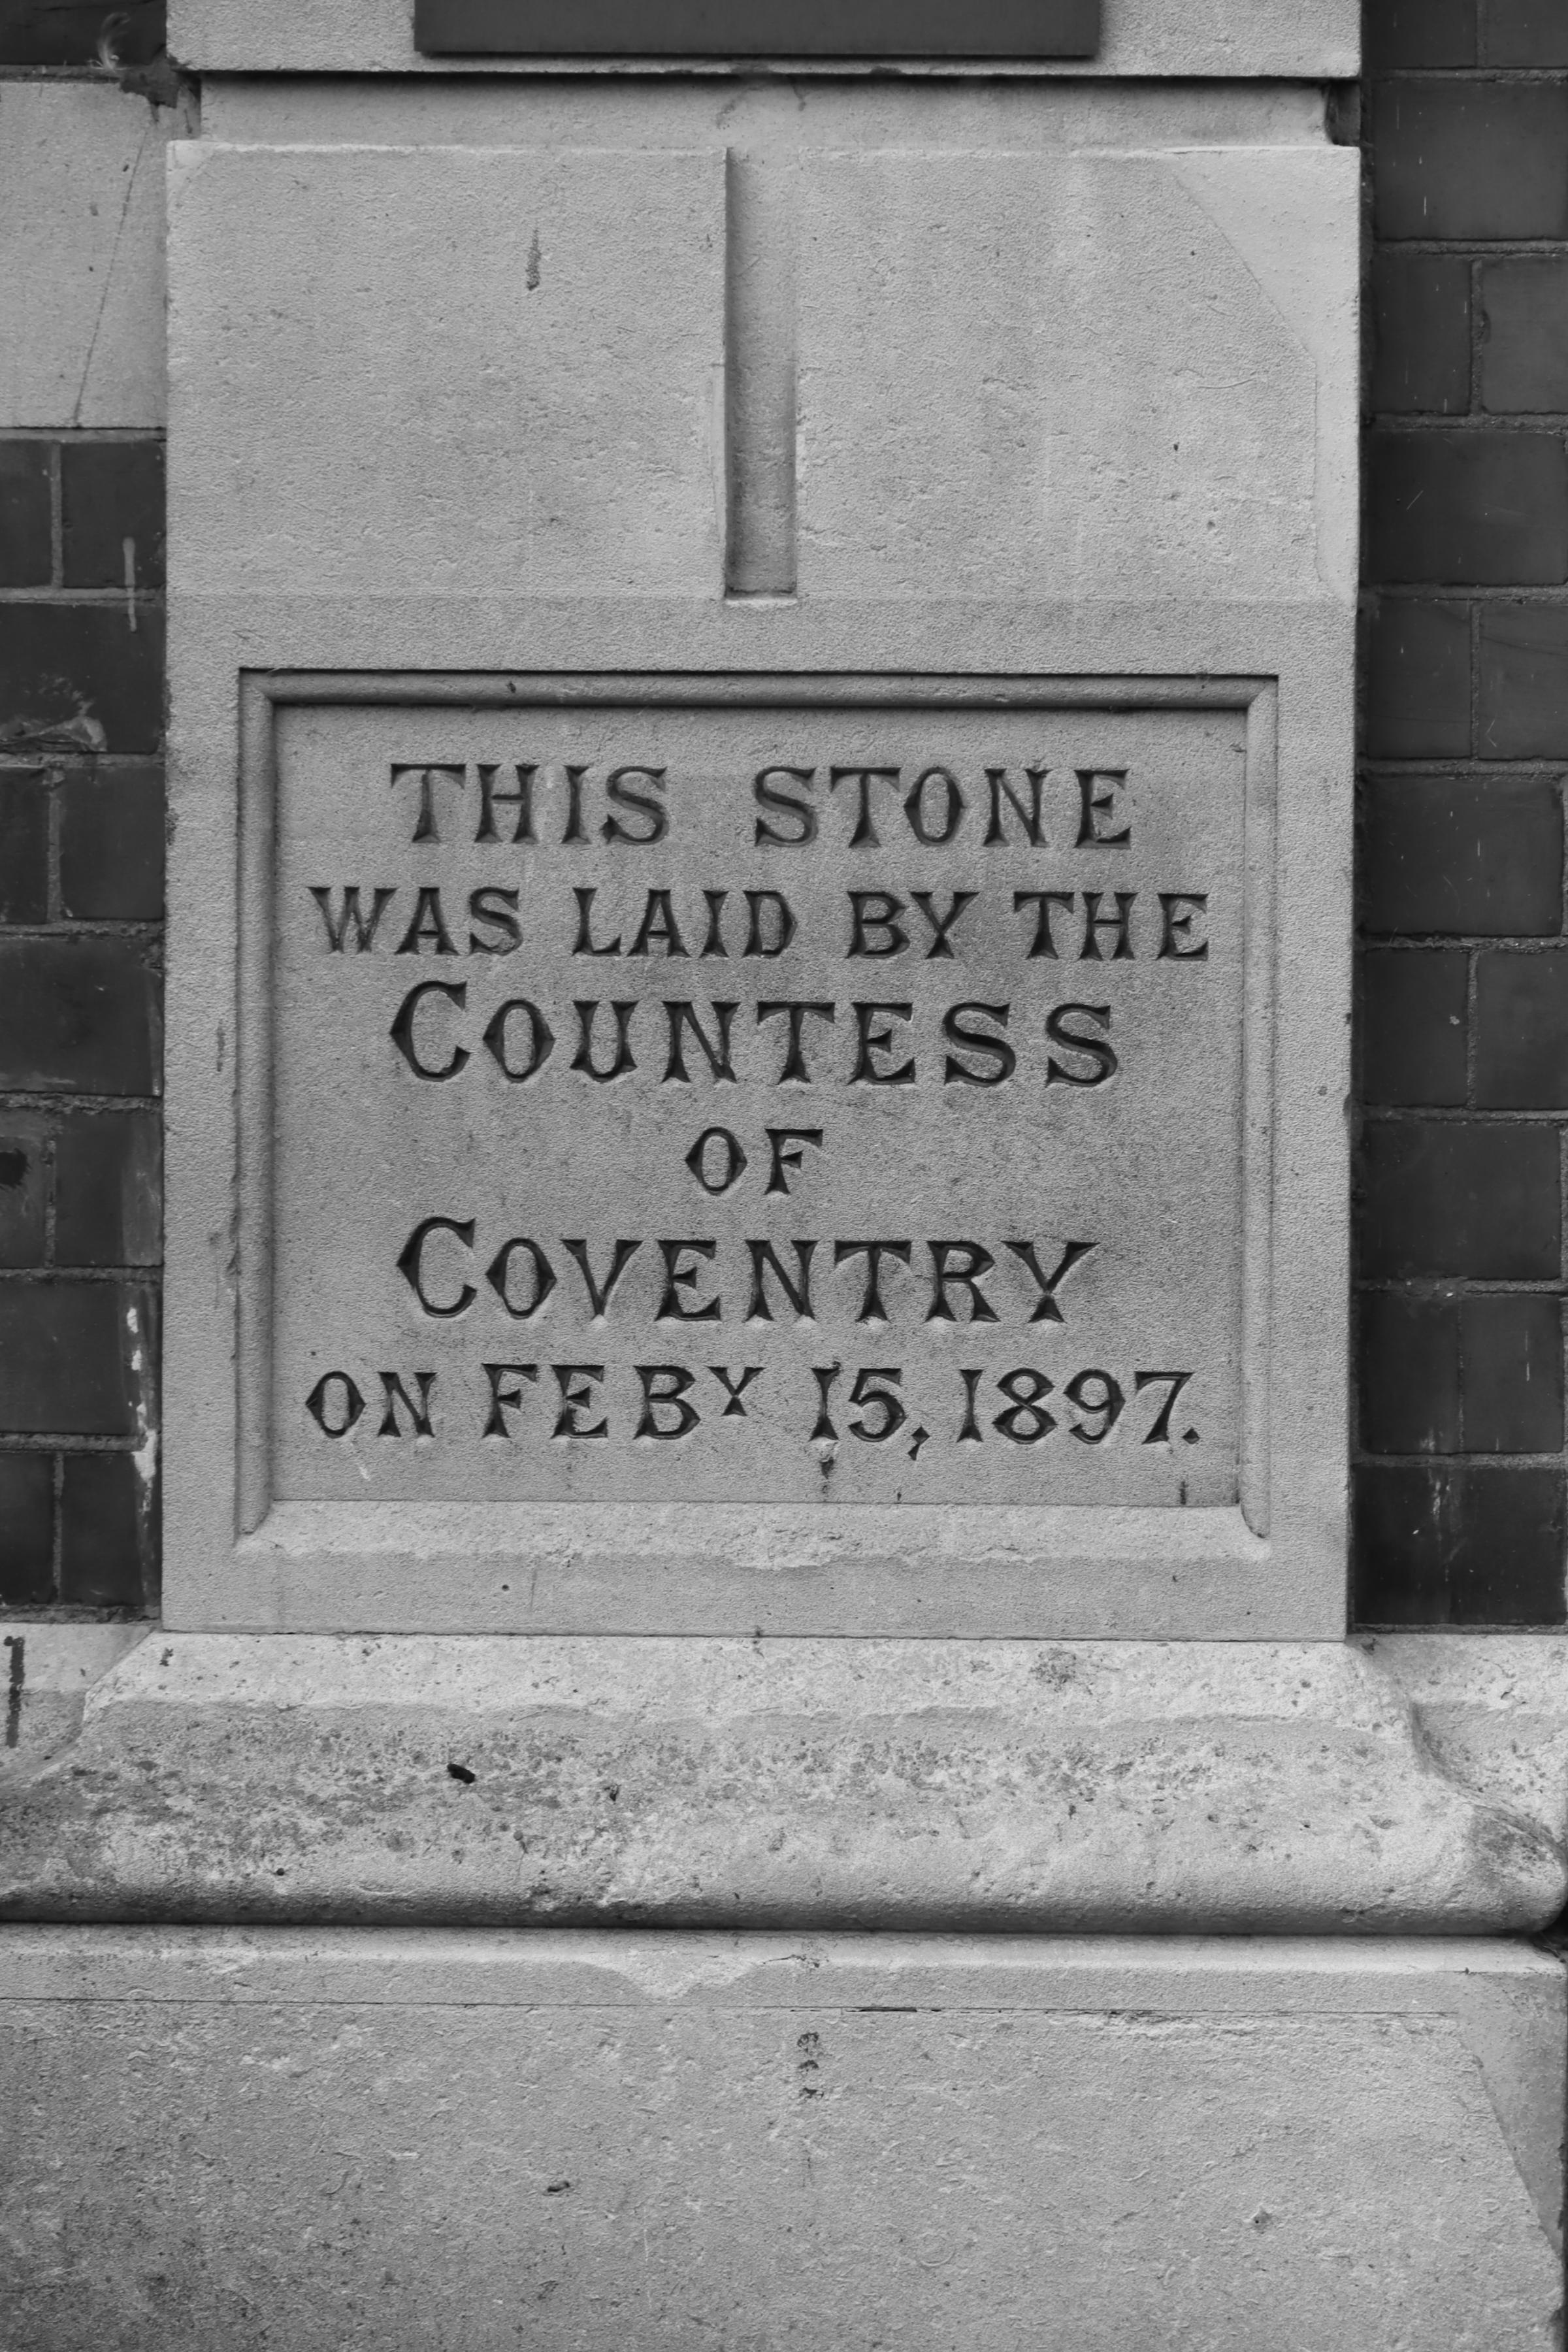 Where will you find this commemorative stone?